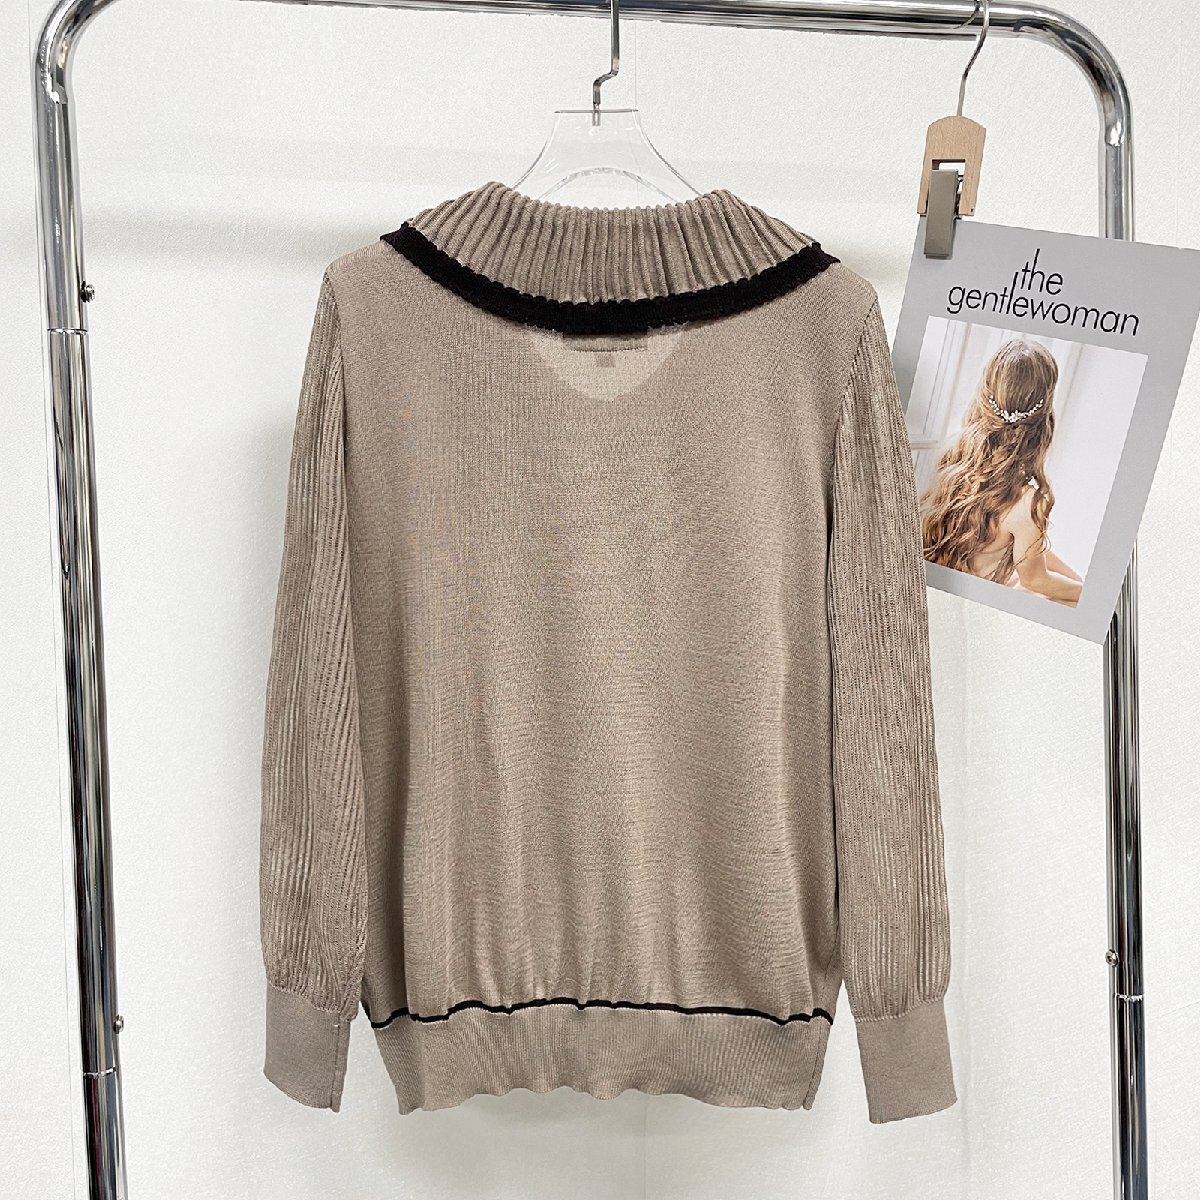 .. Europe made * regular price 4 ten thousand * BVLGARY a departure *RISELIN tops knitted sweater sweatshirt on shortage of stock hand ventilation elegant put on . lady's XL